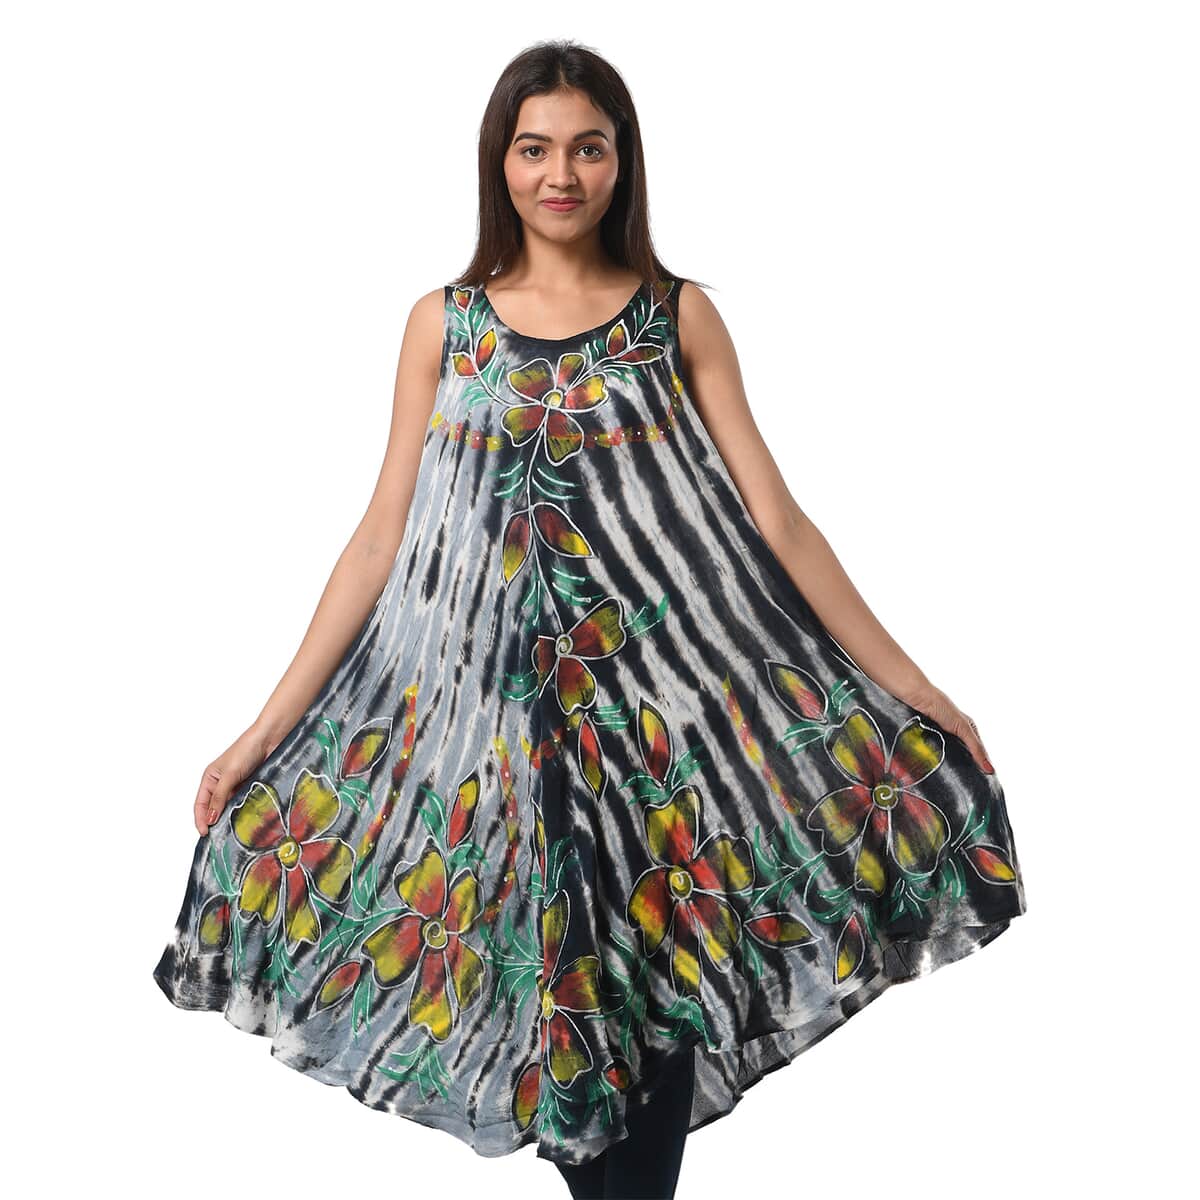 TAMSY Black Stripe Tie Dye with Floral Umbrella Dress - One Size Fits Most (48"x44") image number 0